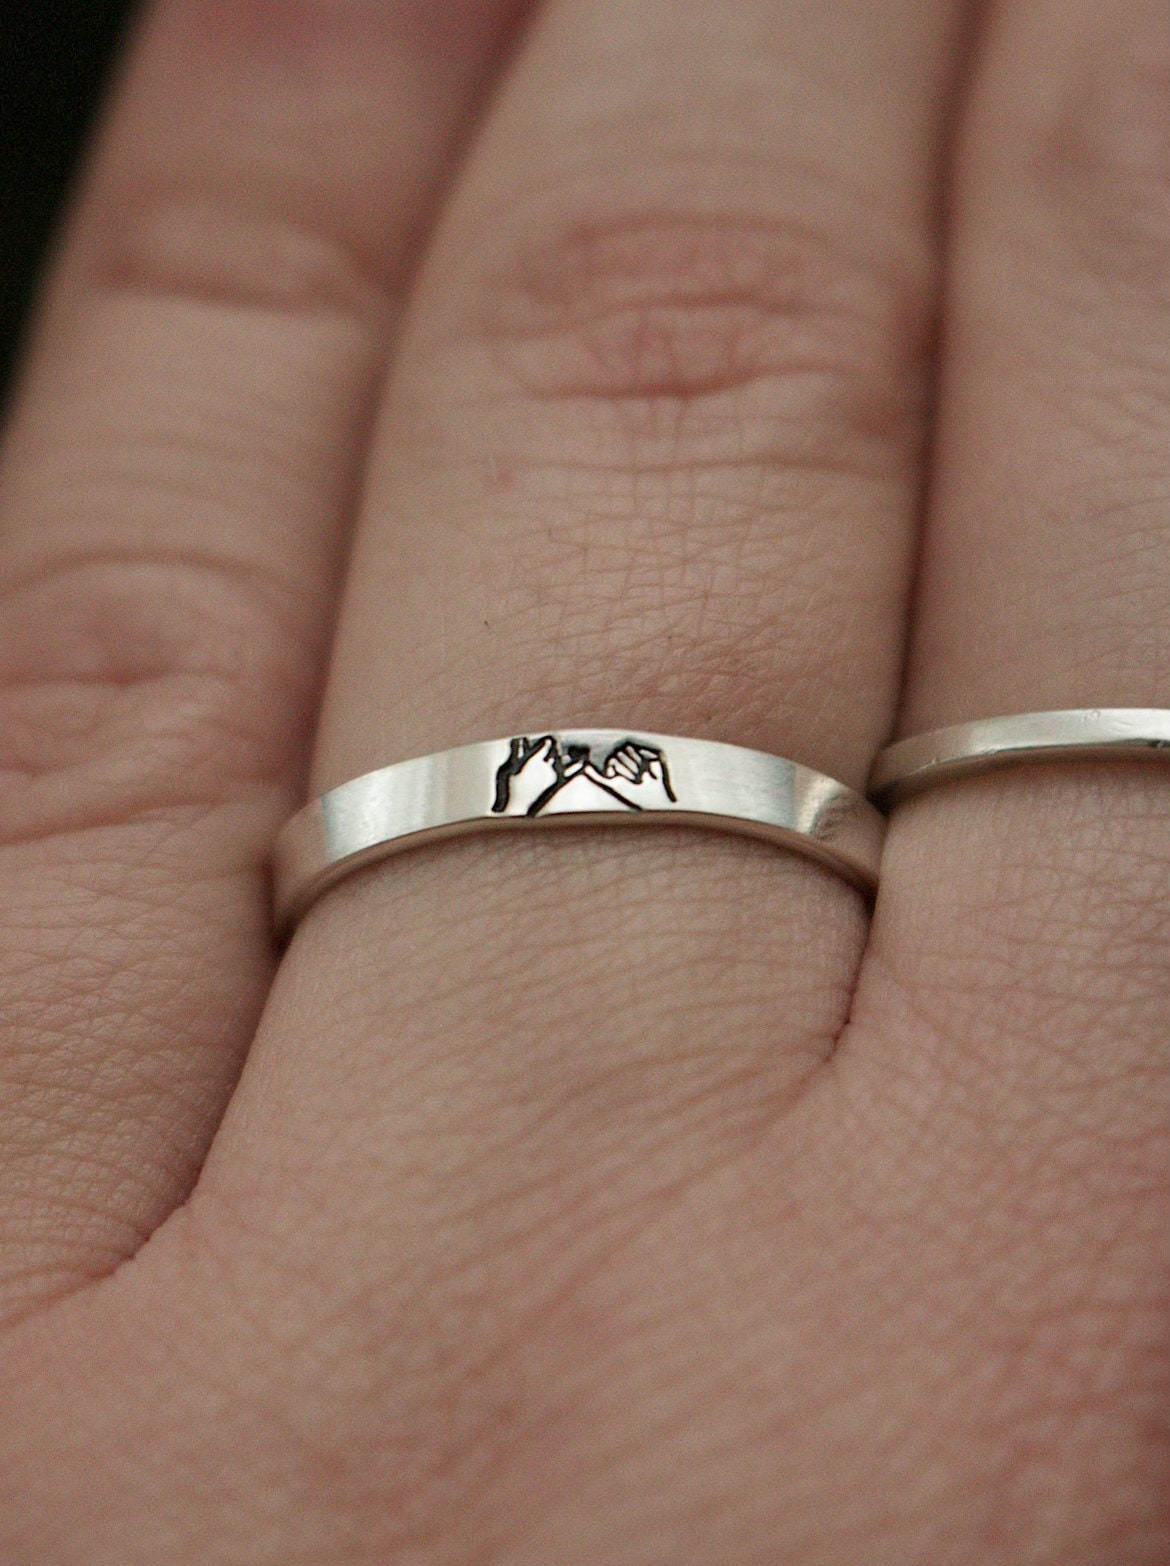 Gold Infinity Ring / Moissanite Promise Ring / Infinity Knot Ring /  Minimalist Wedding Ring / Simple Engagement Ring / Dainty Ring for Women -  Etsy | Simple ring design, Gold rings fashion, Cute promise rings